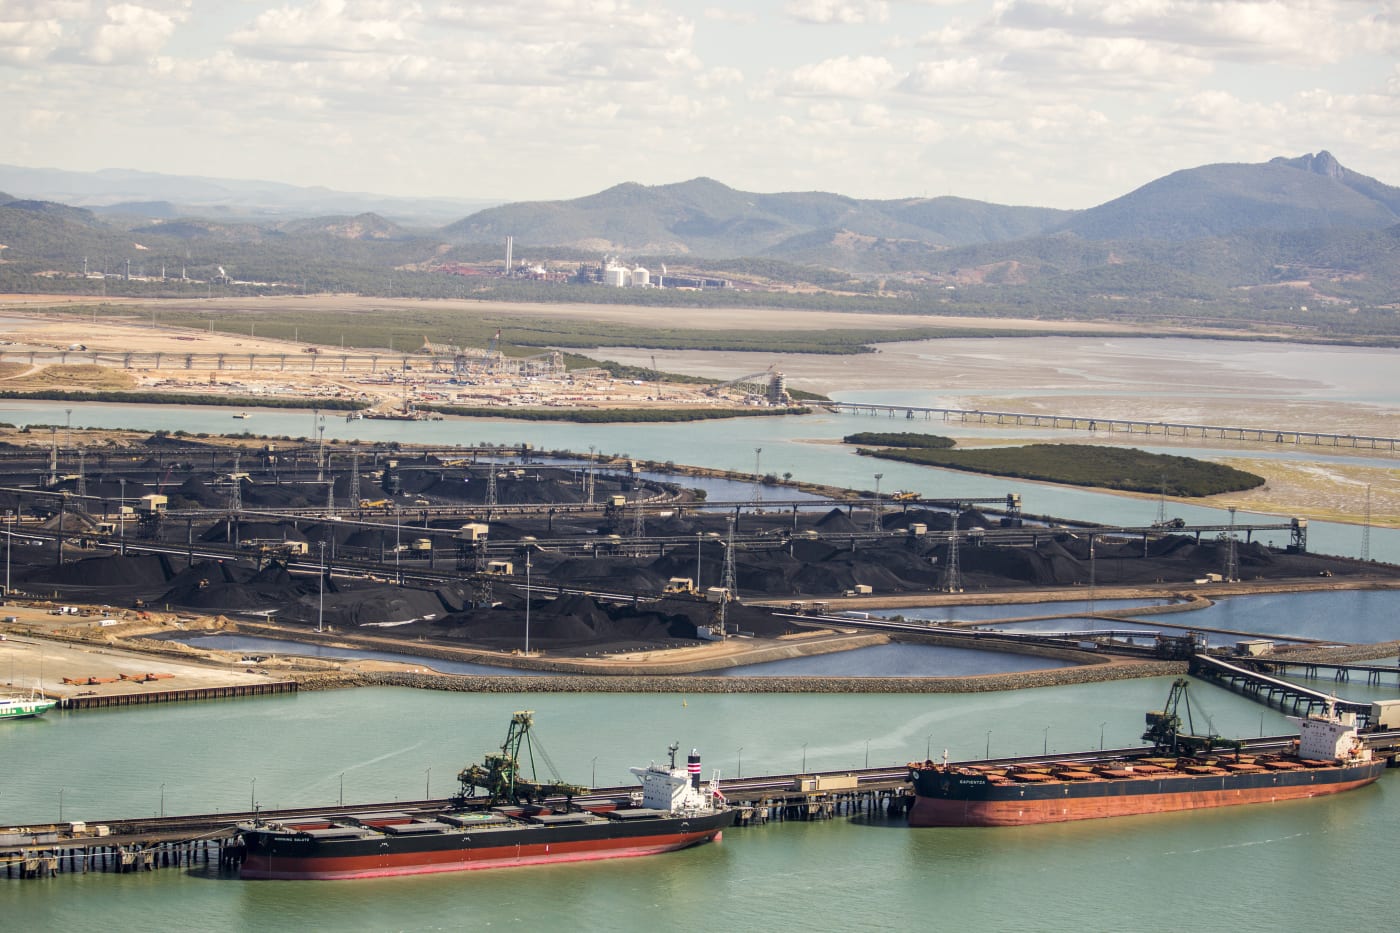 Large export vessels are loaded with coal and other cargo at the Gladstone Port. Queensland, Australia.